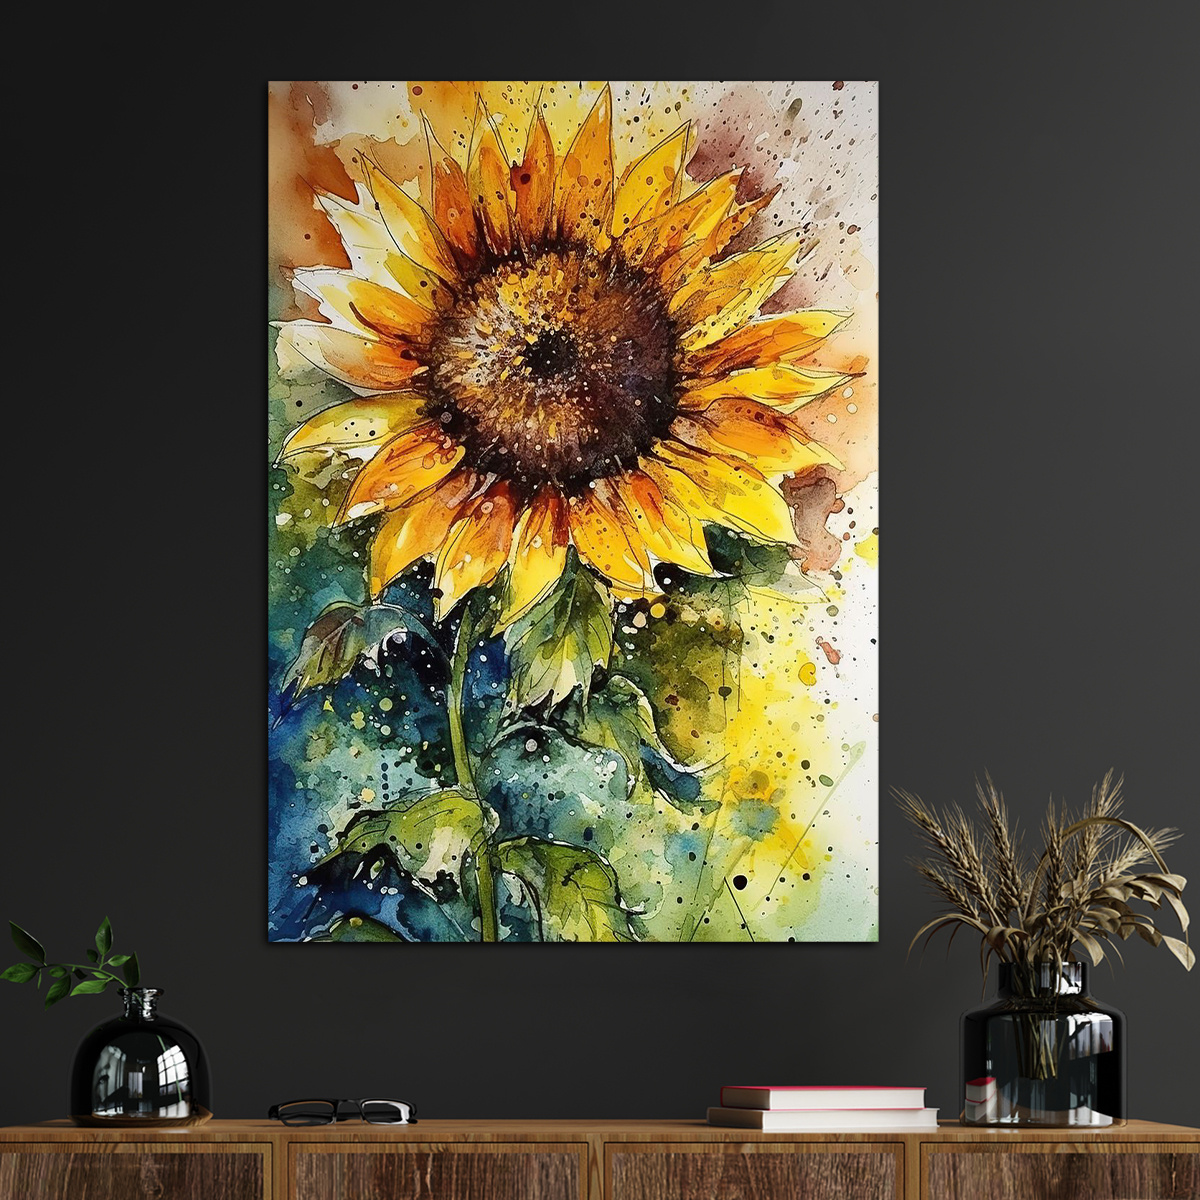 

1pc Sunflower Canvas Wall Art For Home Decor, Sunflower Lovers Poster Wall Decor, Prints For Living Room Bedroom Kitchen Office Cafe Decor